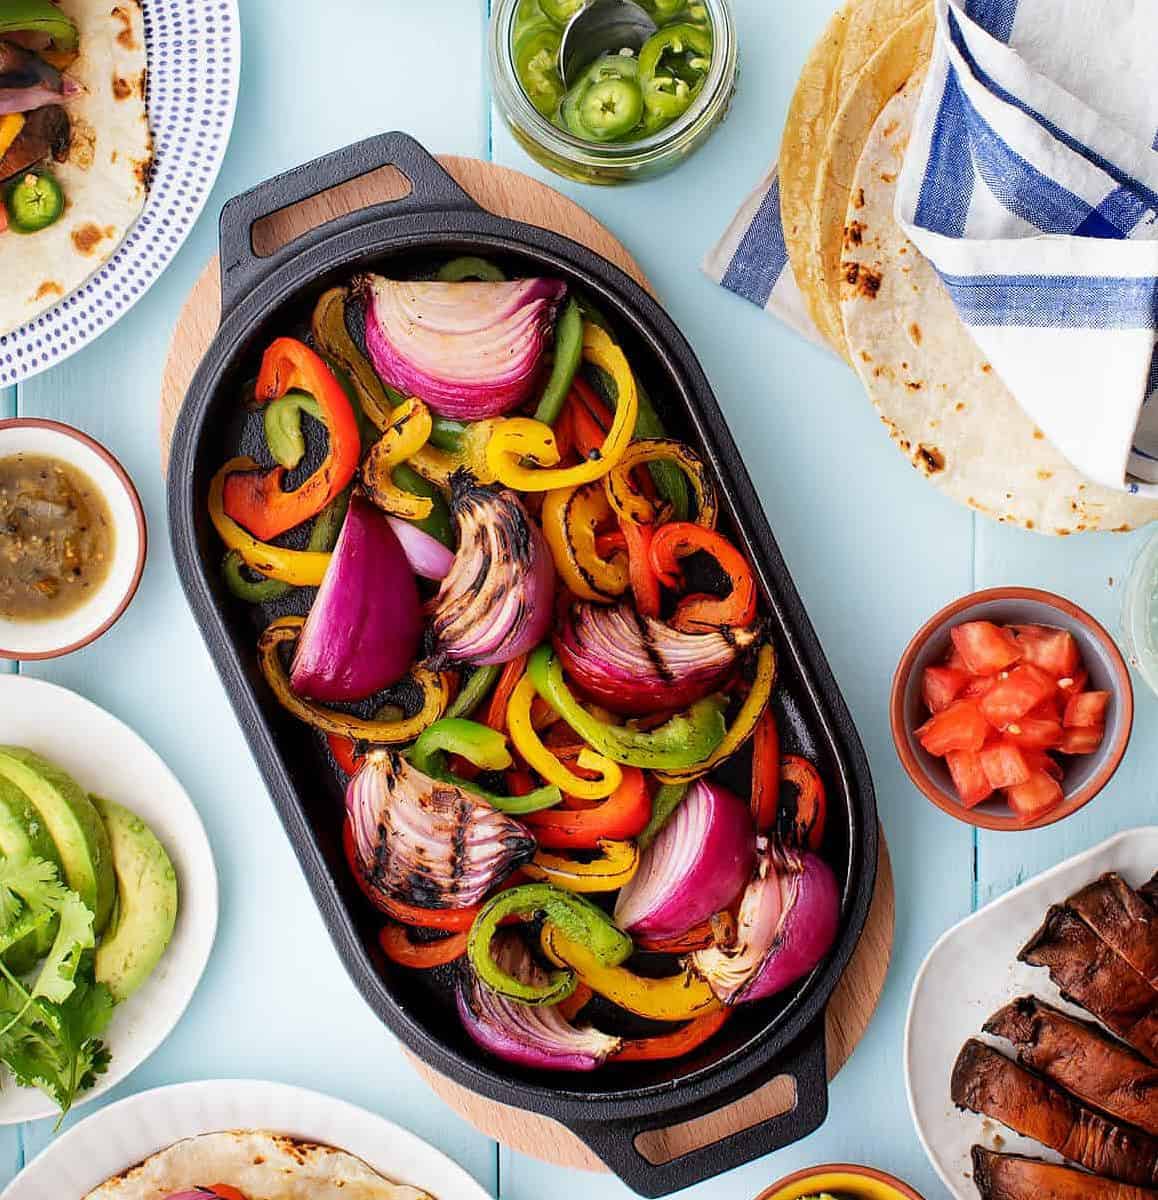  I love how quick and easy it is to make these vegetarian fajitas